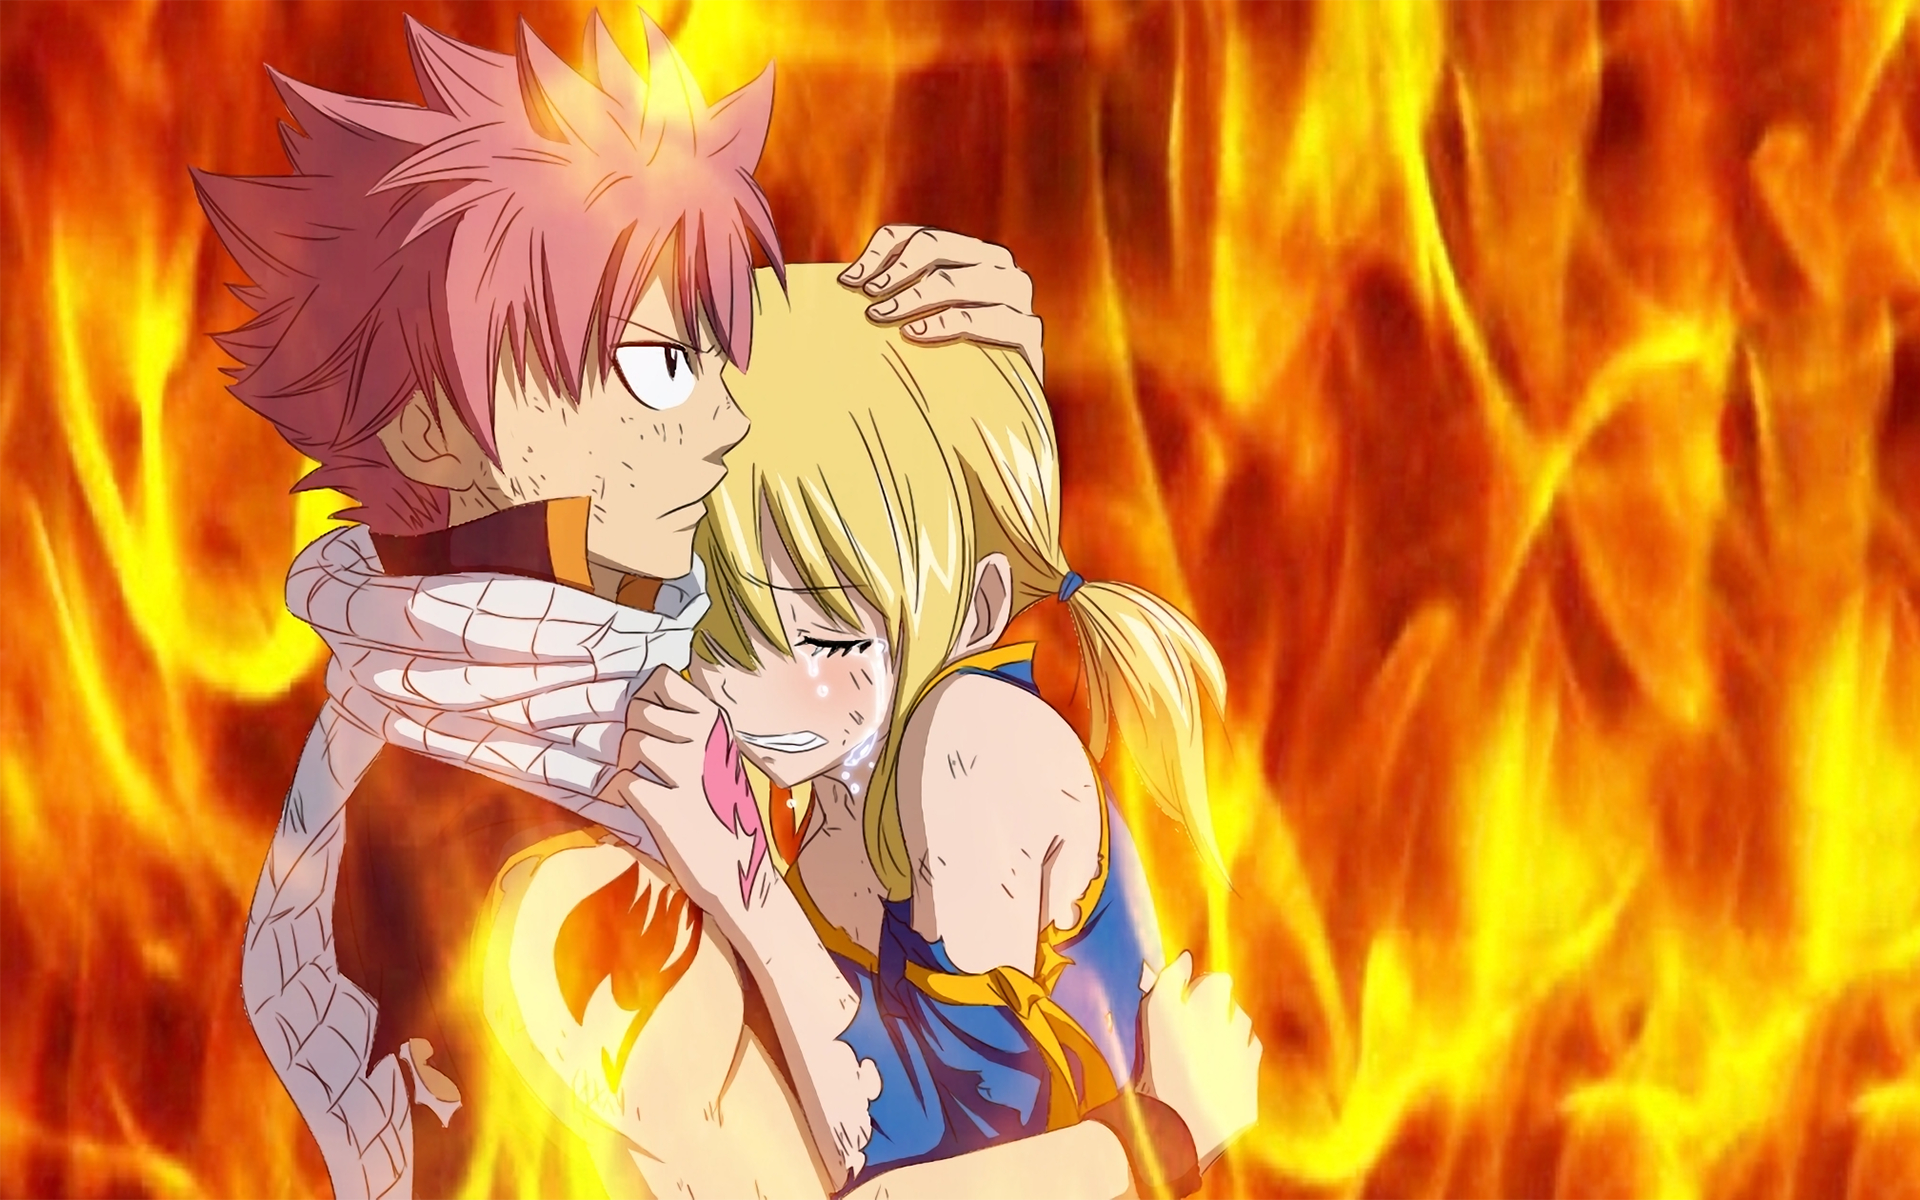 1920x1200 Download 2880x1800 Lucy Heartfilia, Tears, Crying, Natsu Dragneel, Fairy Tail, Fire Wallpapers for MacBook Pro 15 inch